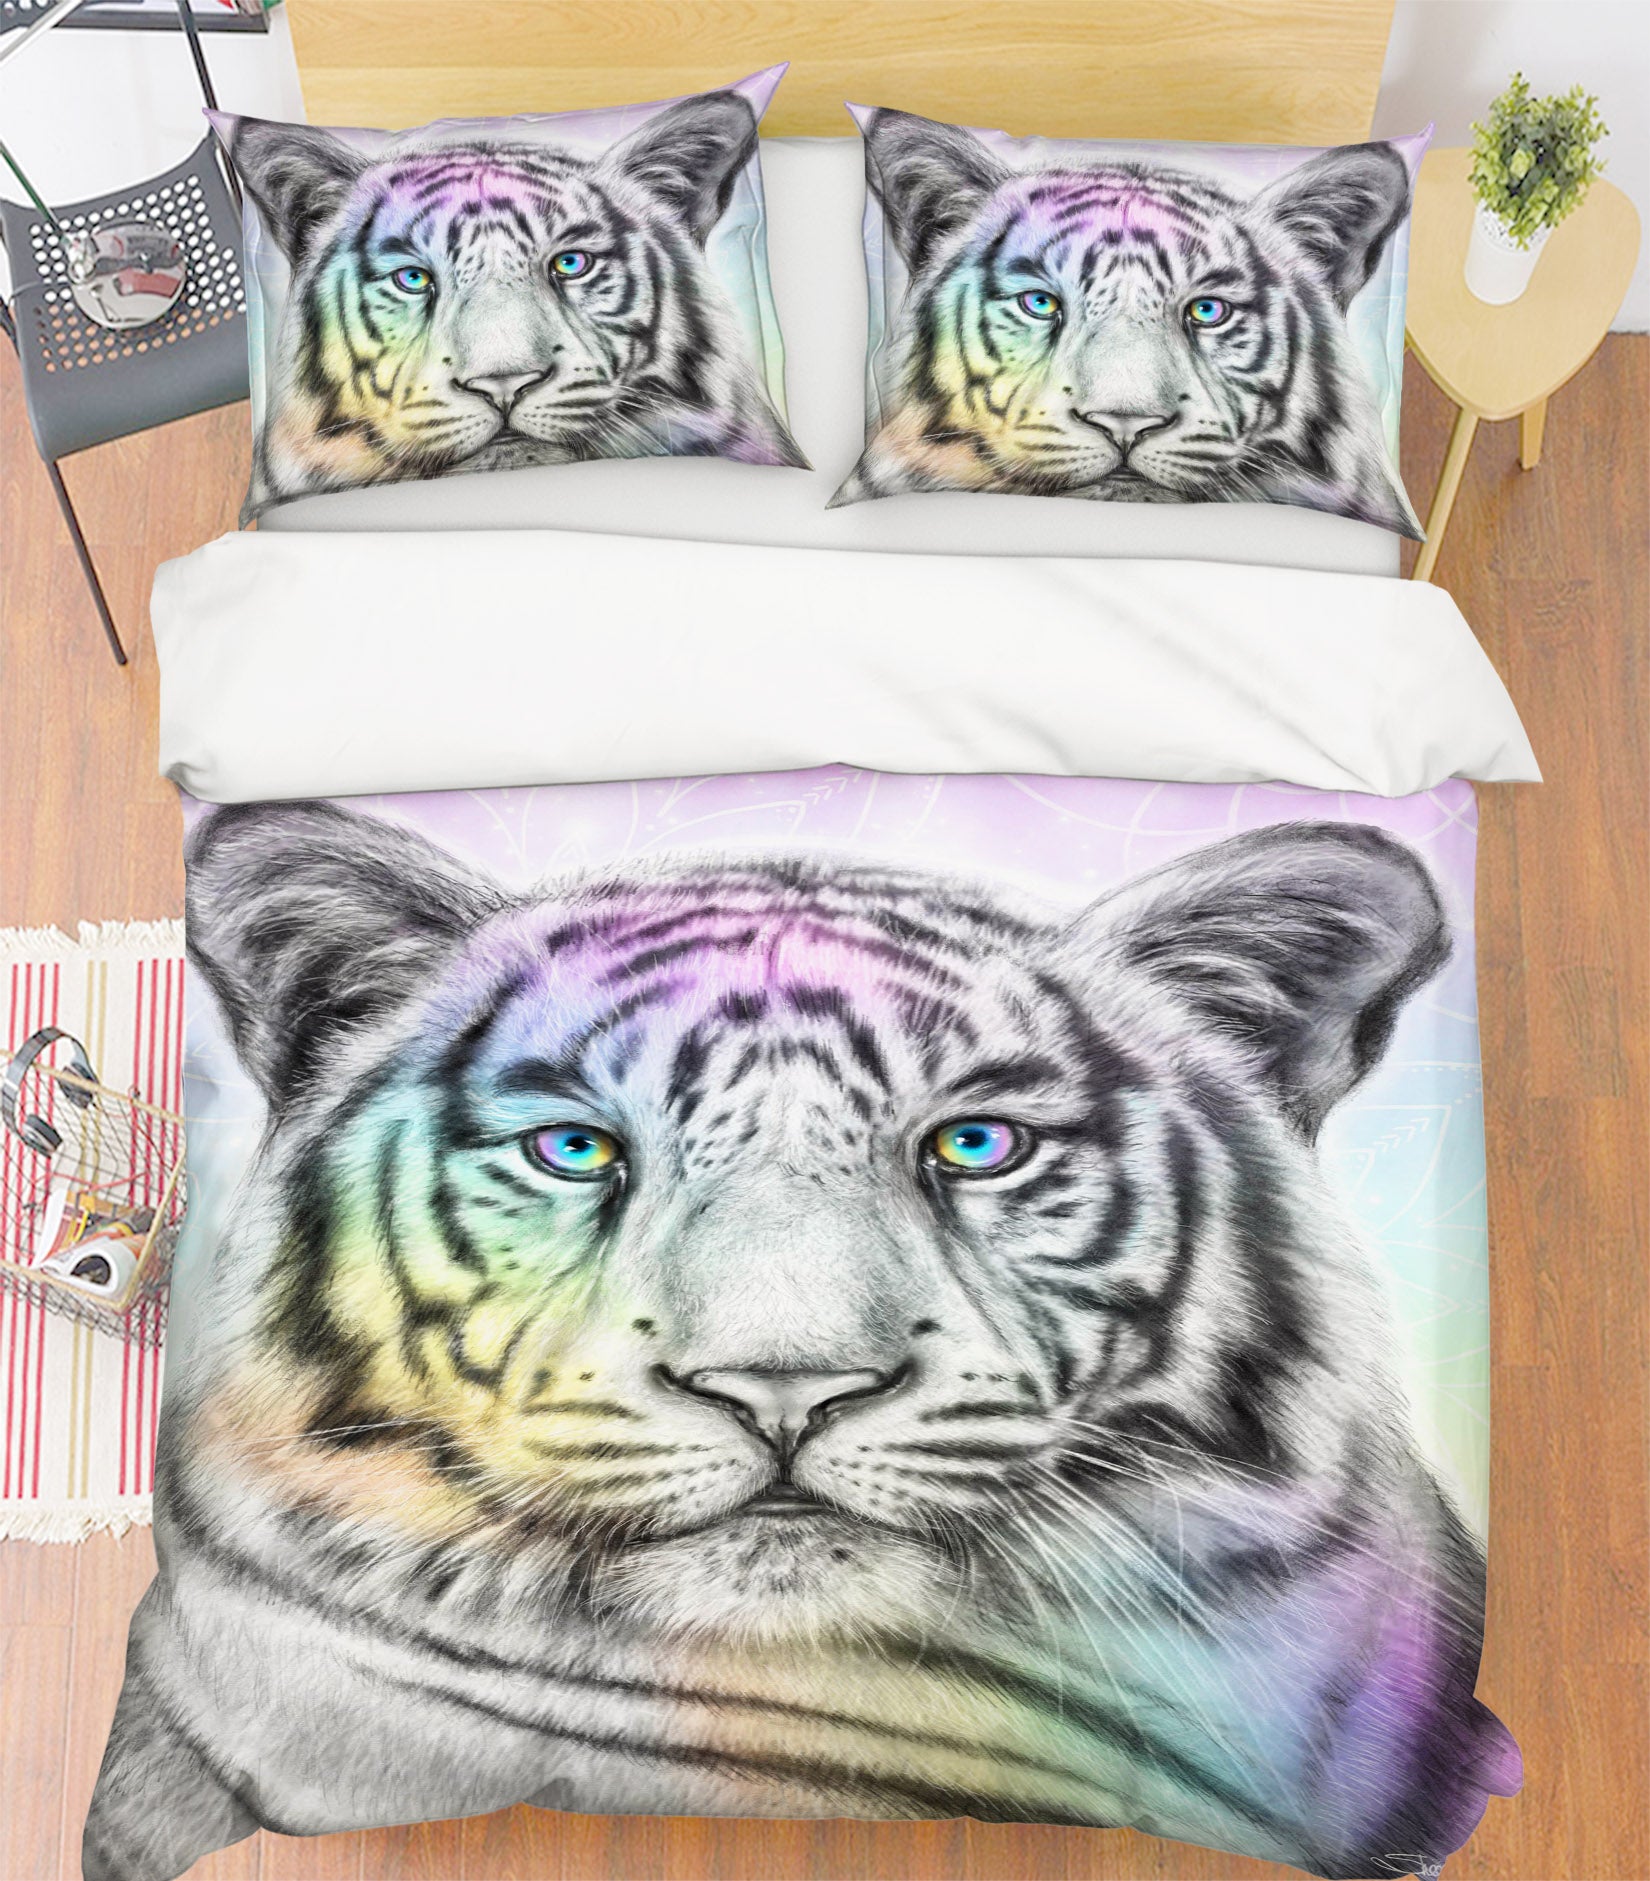 3D Hand Drawn Tiger 8586 Sheena Pike Bedding Bed Pillowcases Quilt Cover Duvet Cover